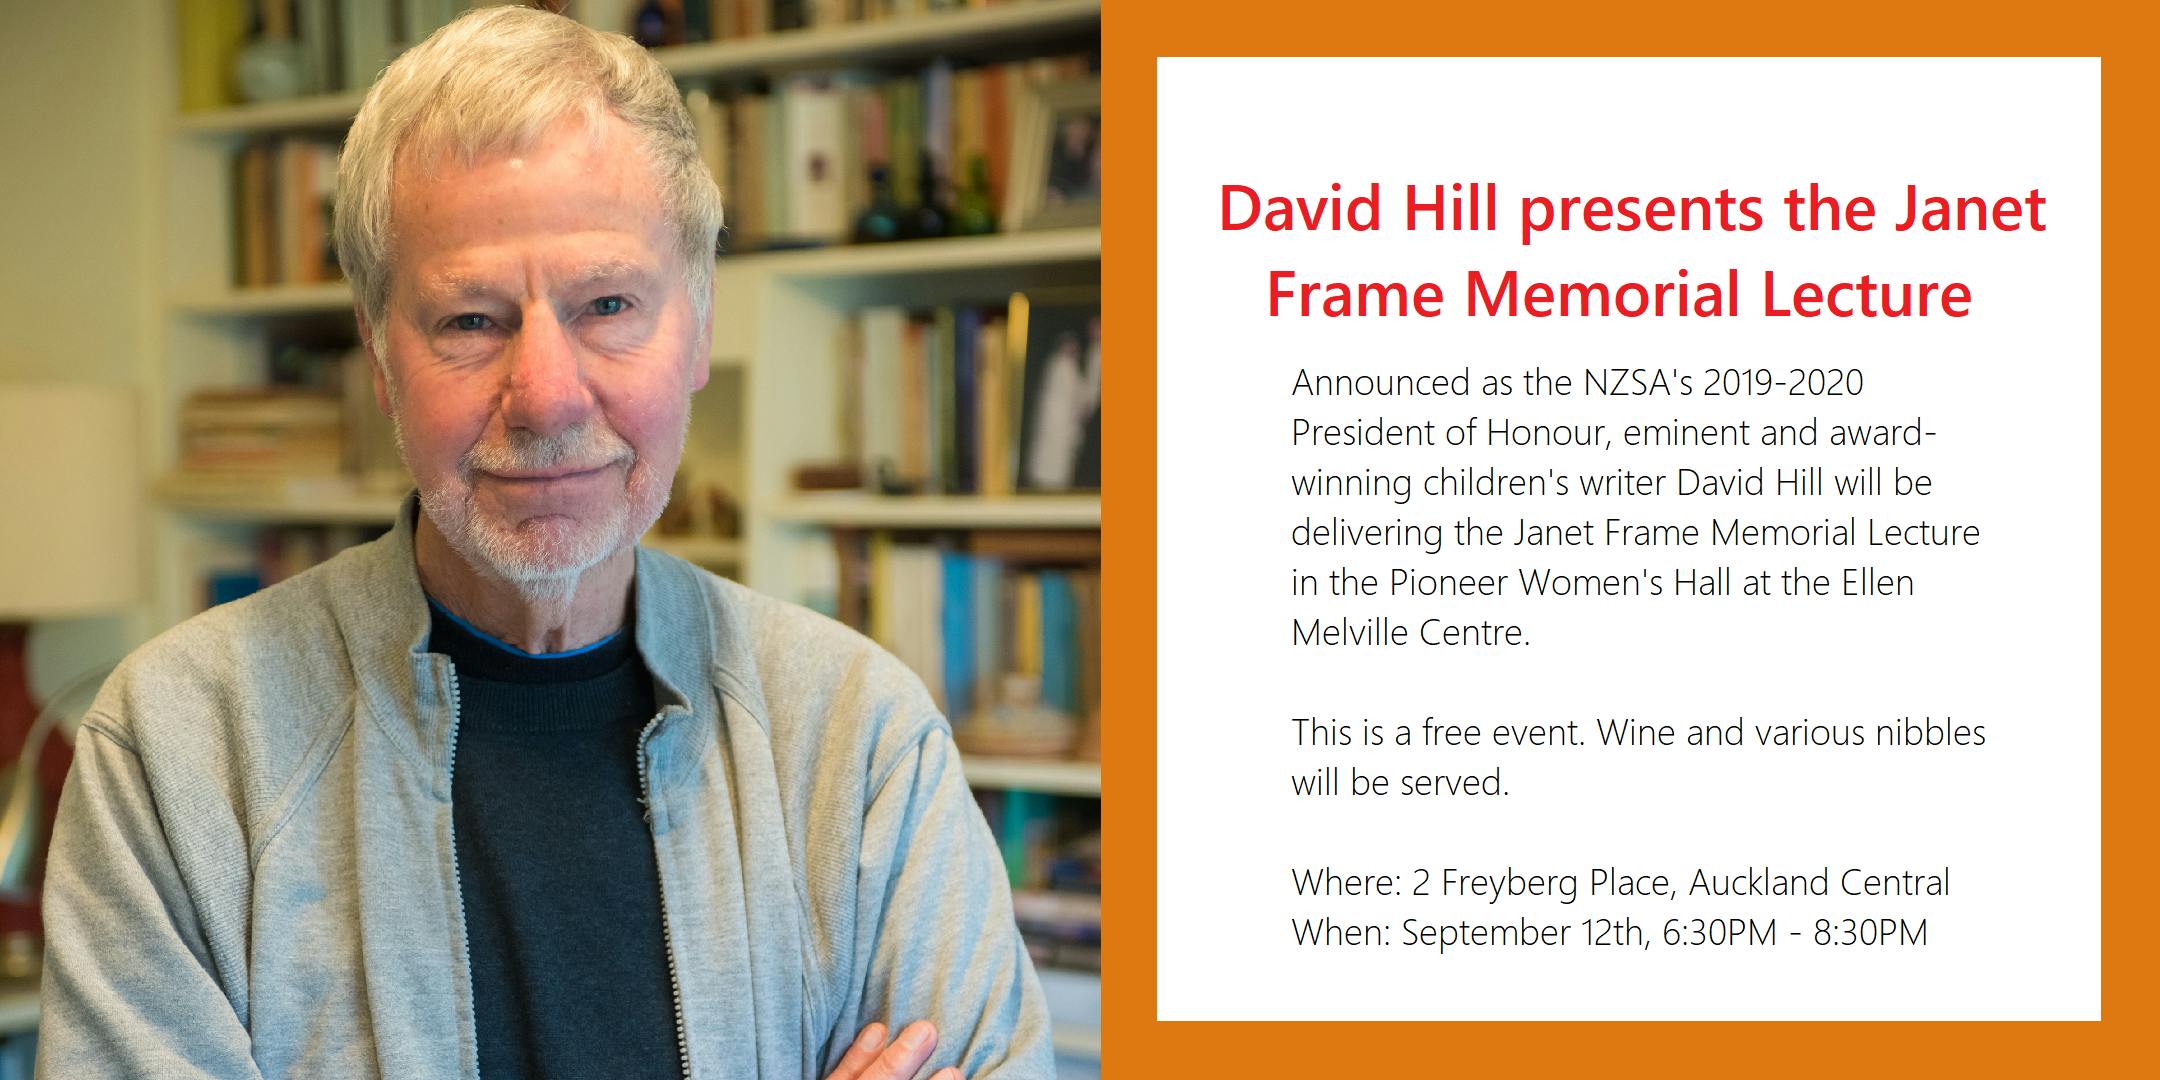 David Hill presents the Janet Frame Memorial Lecture